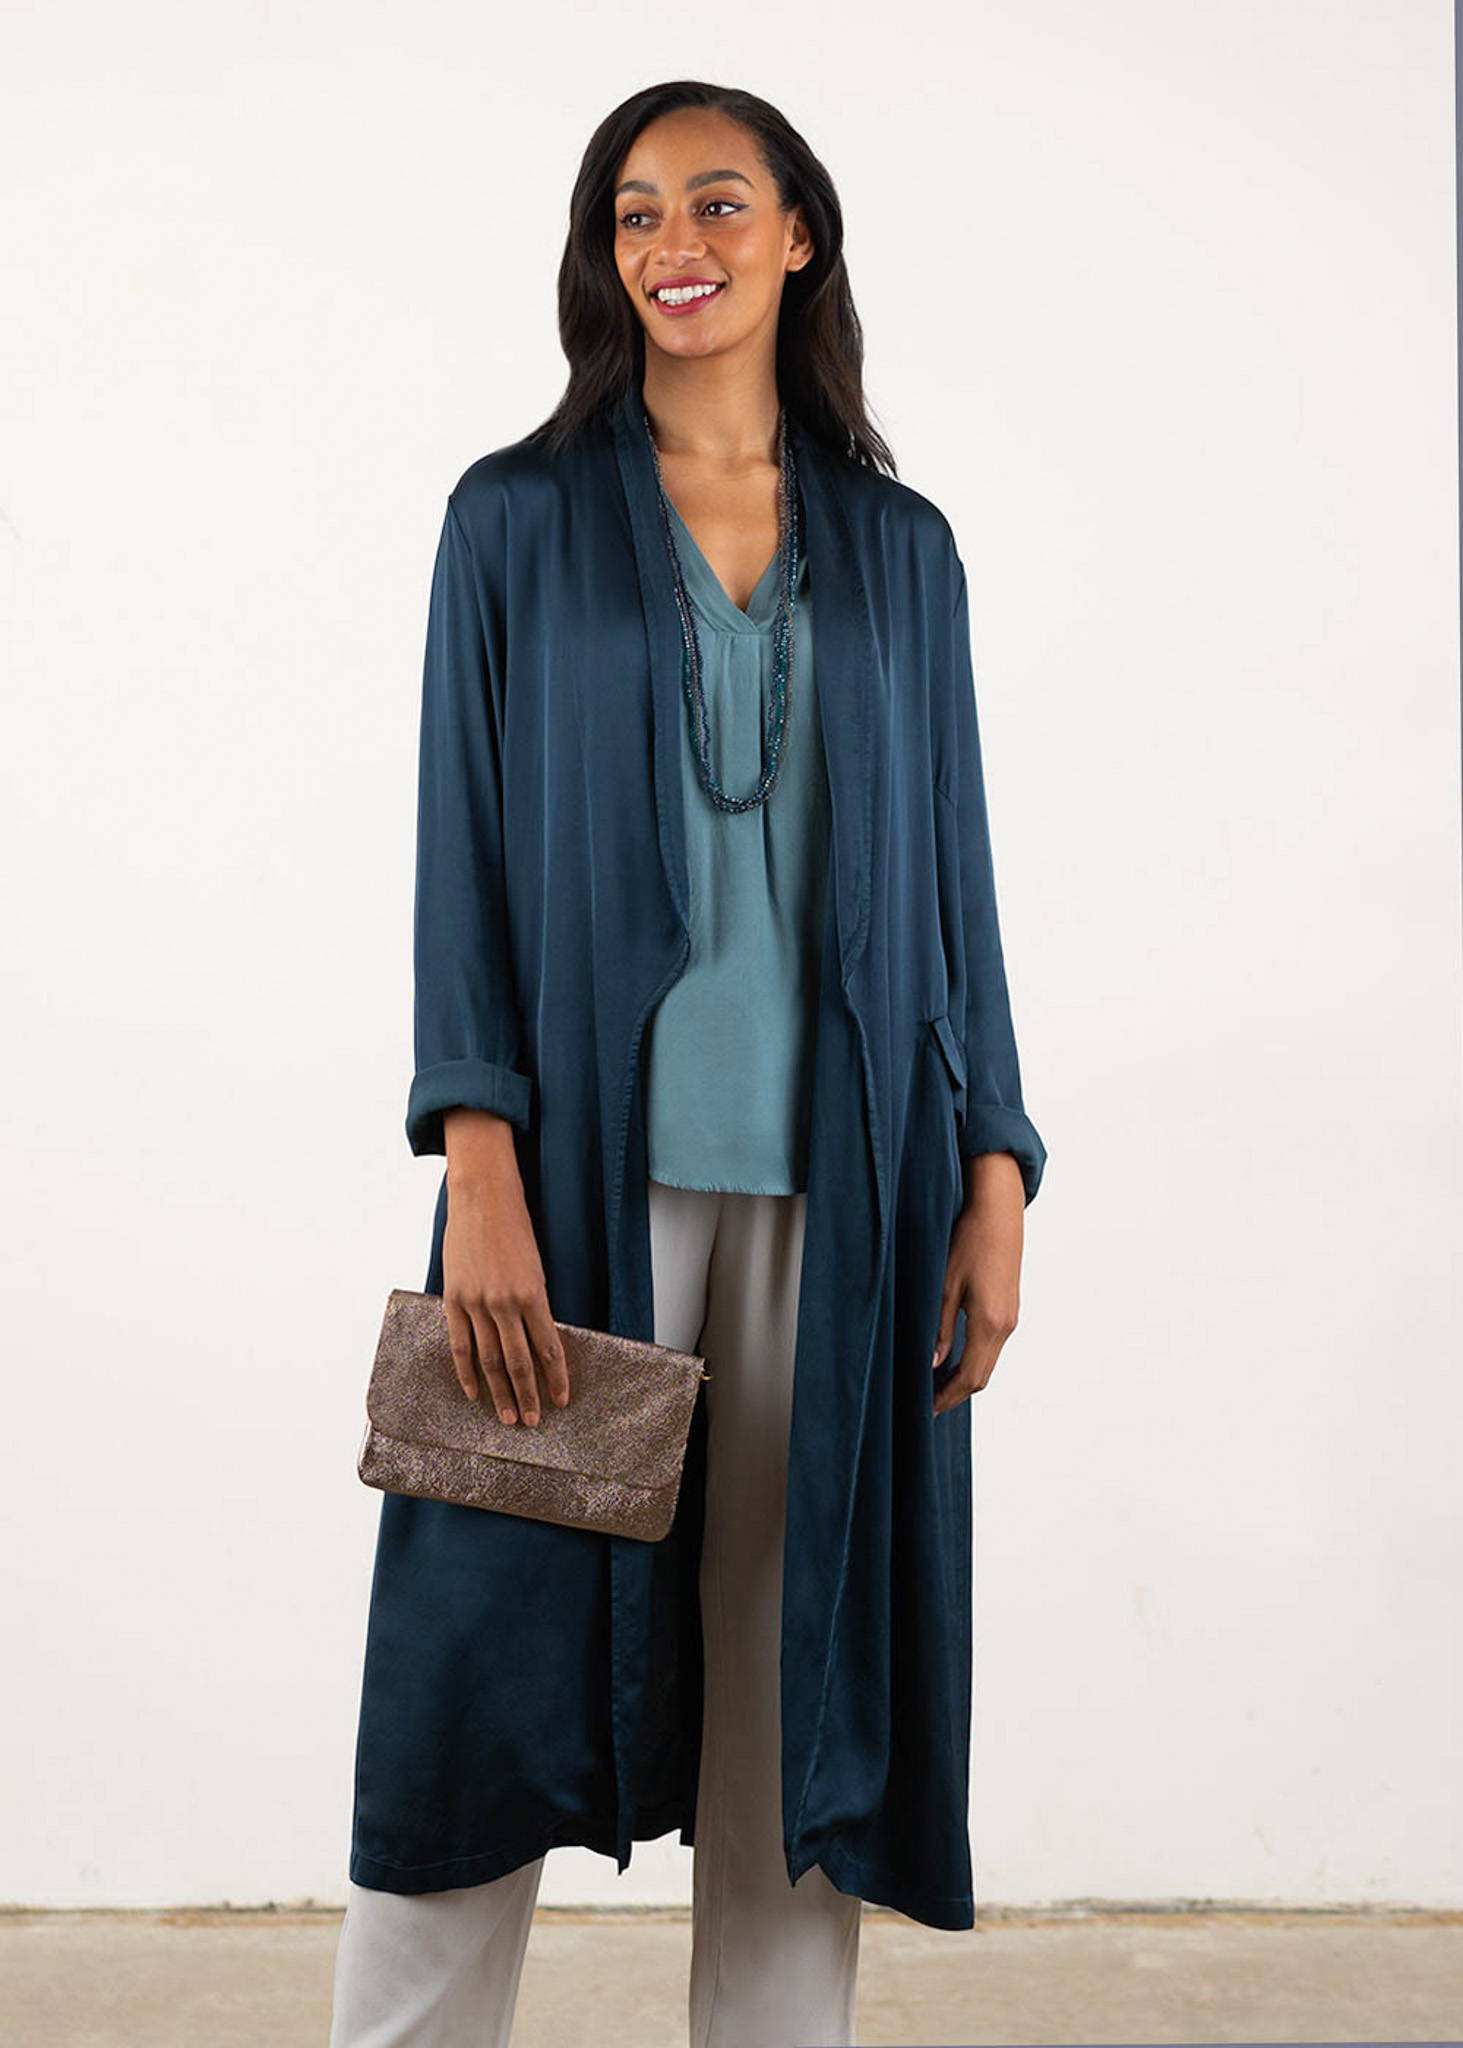 A model wearing a longline teal satin jacket over a blue grey sleeveless top, crystal necklaces, oatmeal trousers and a metallic champagne coloured clutch  bag